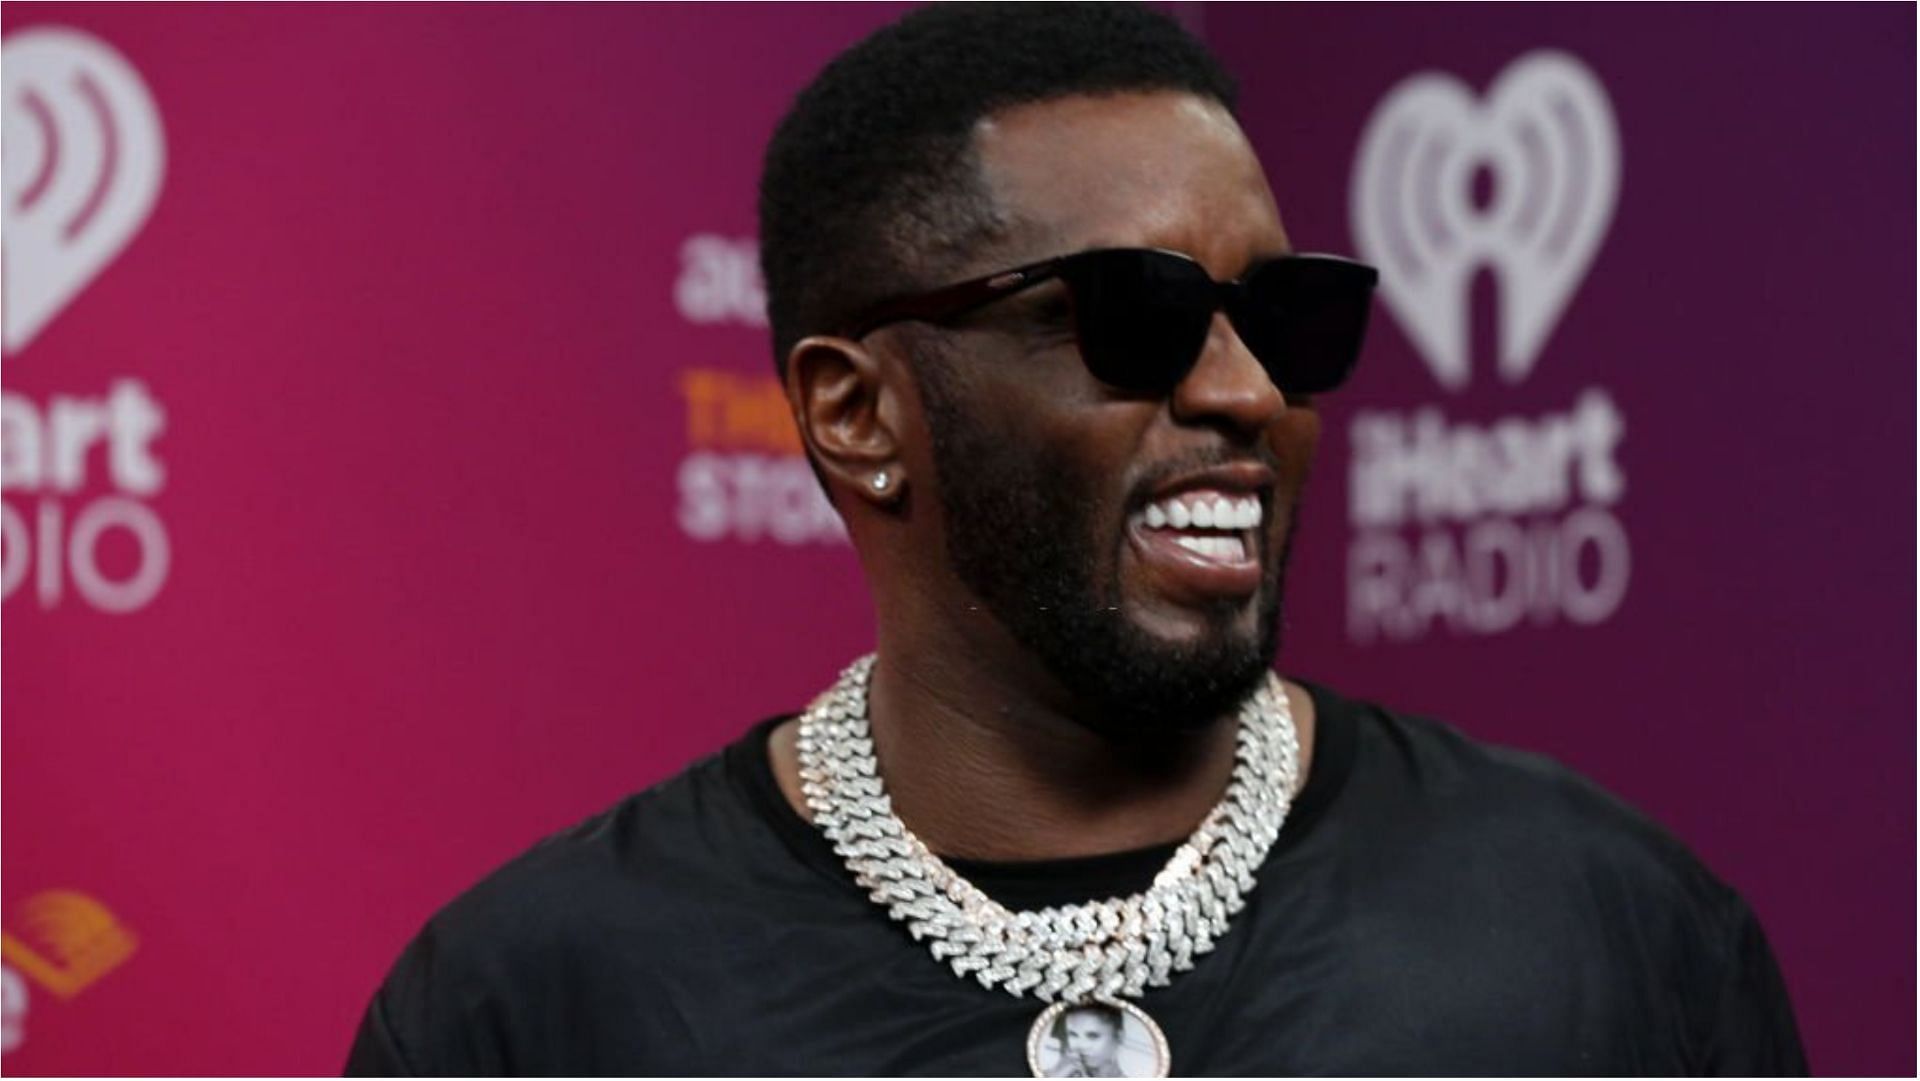 Diddy has accumulated wealth from his musical career and business deals (Image via Gabe Ginsberg/Getty Images)